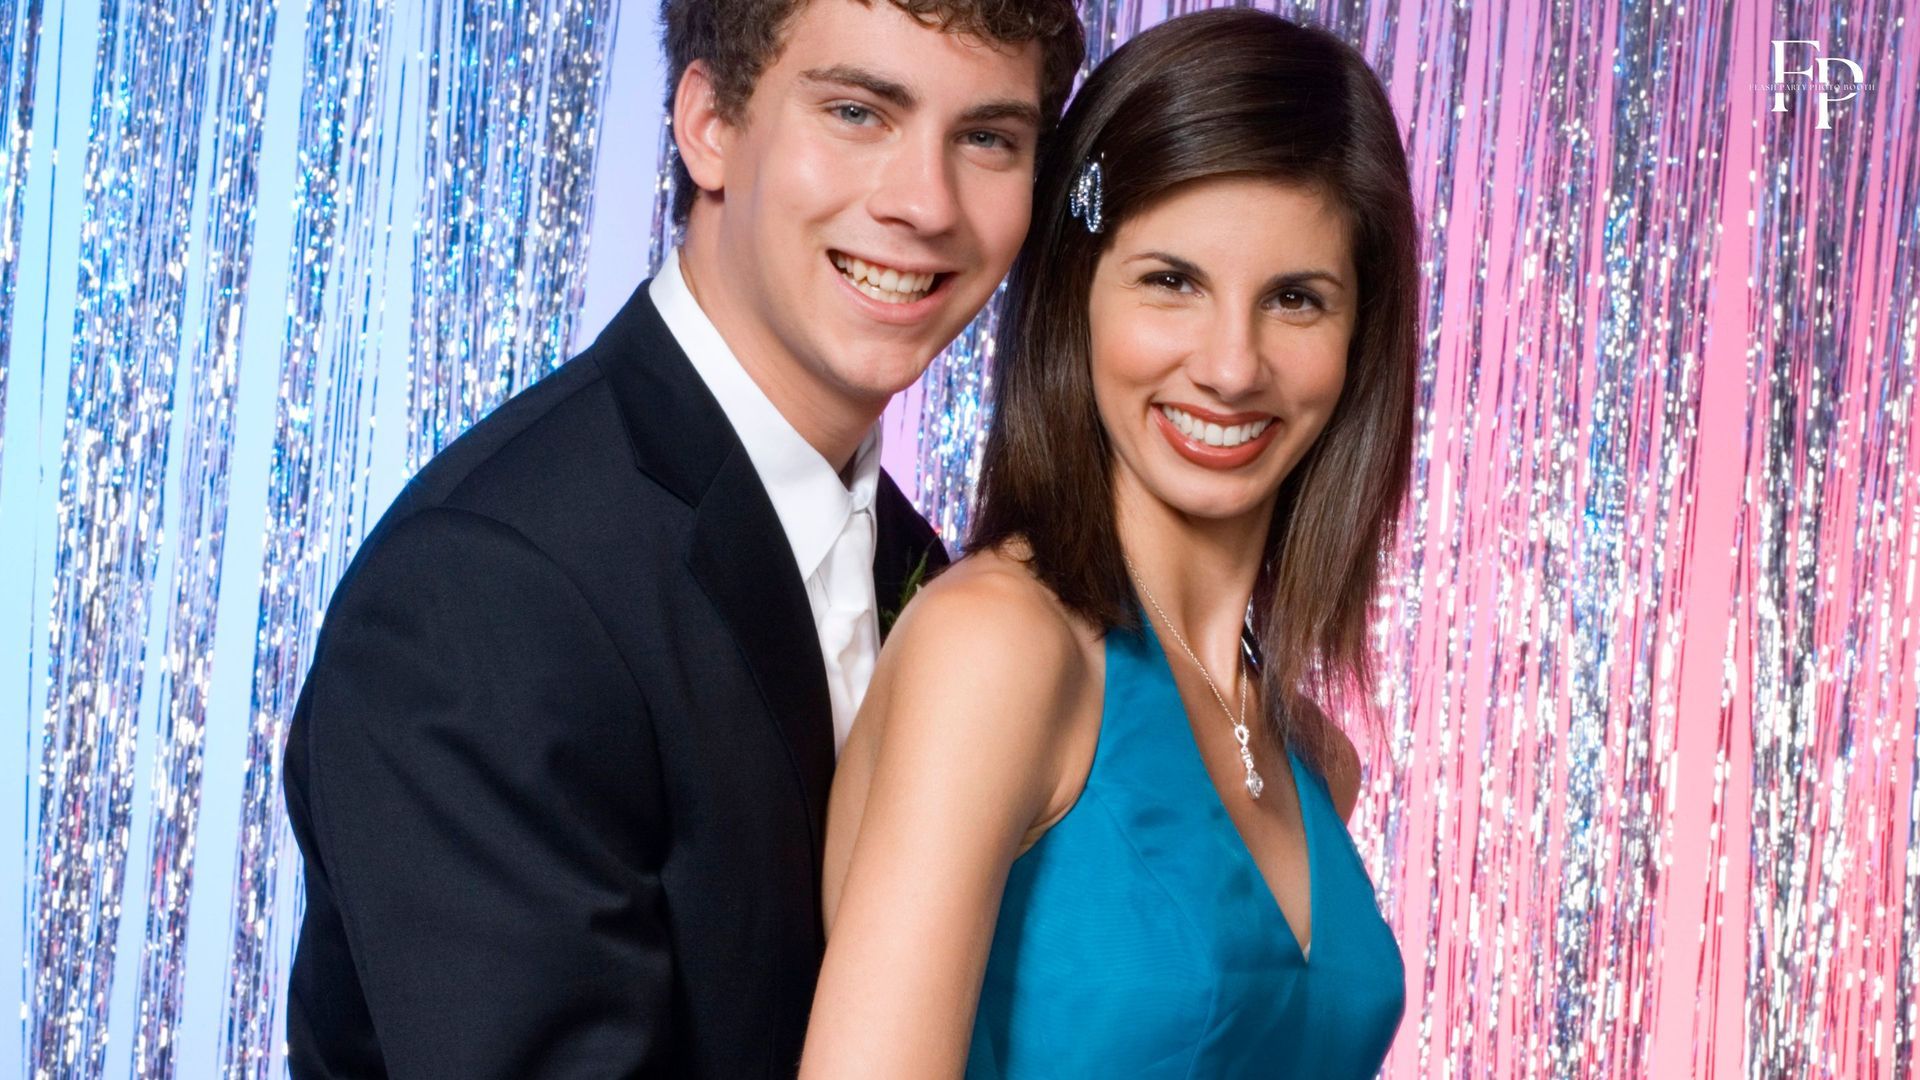 Teens dressed in formal attire, smiling and making memories in the prom photo booth.